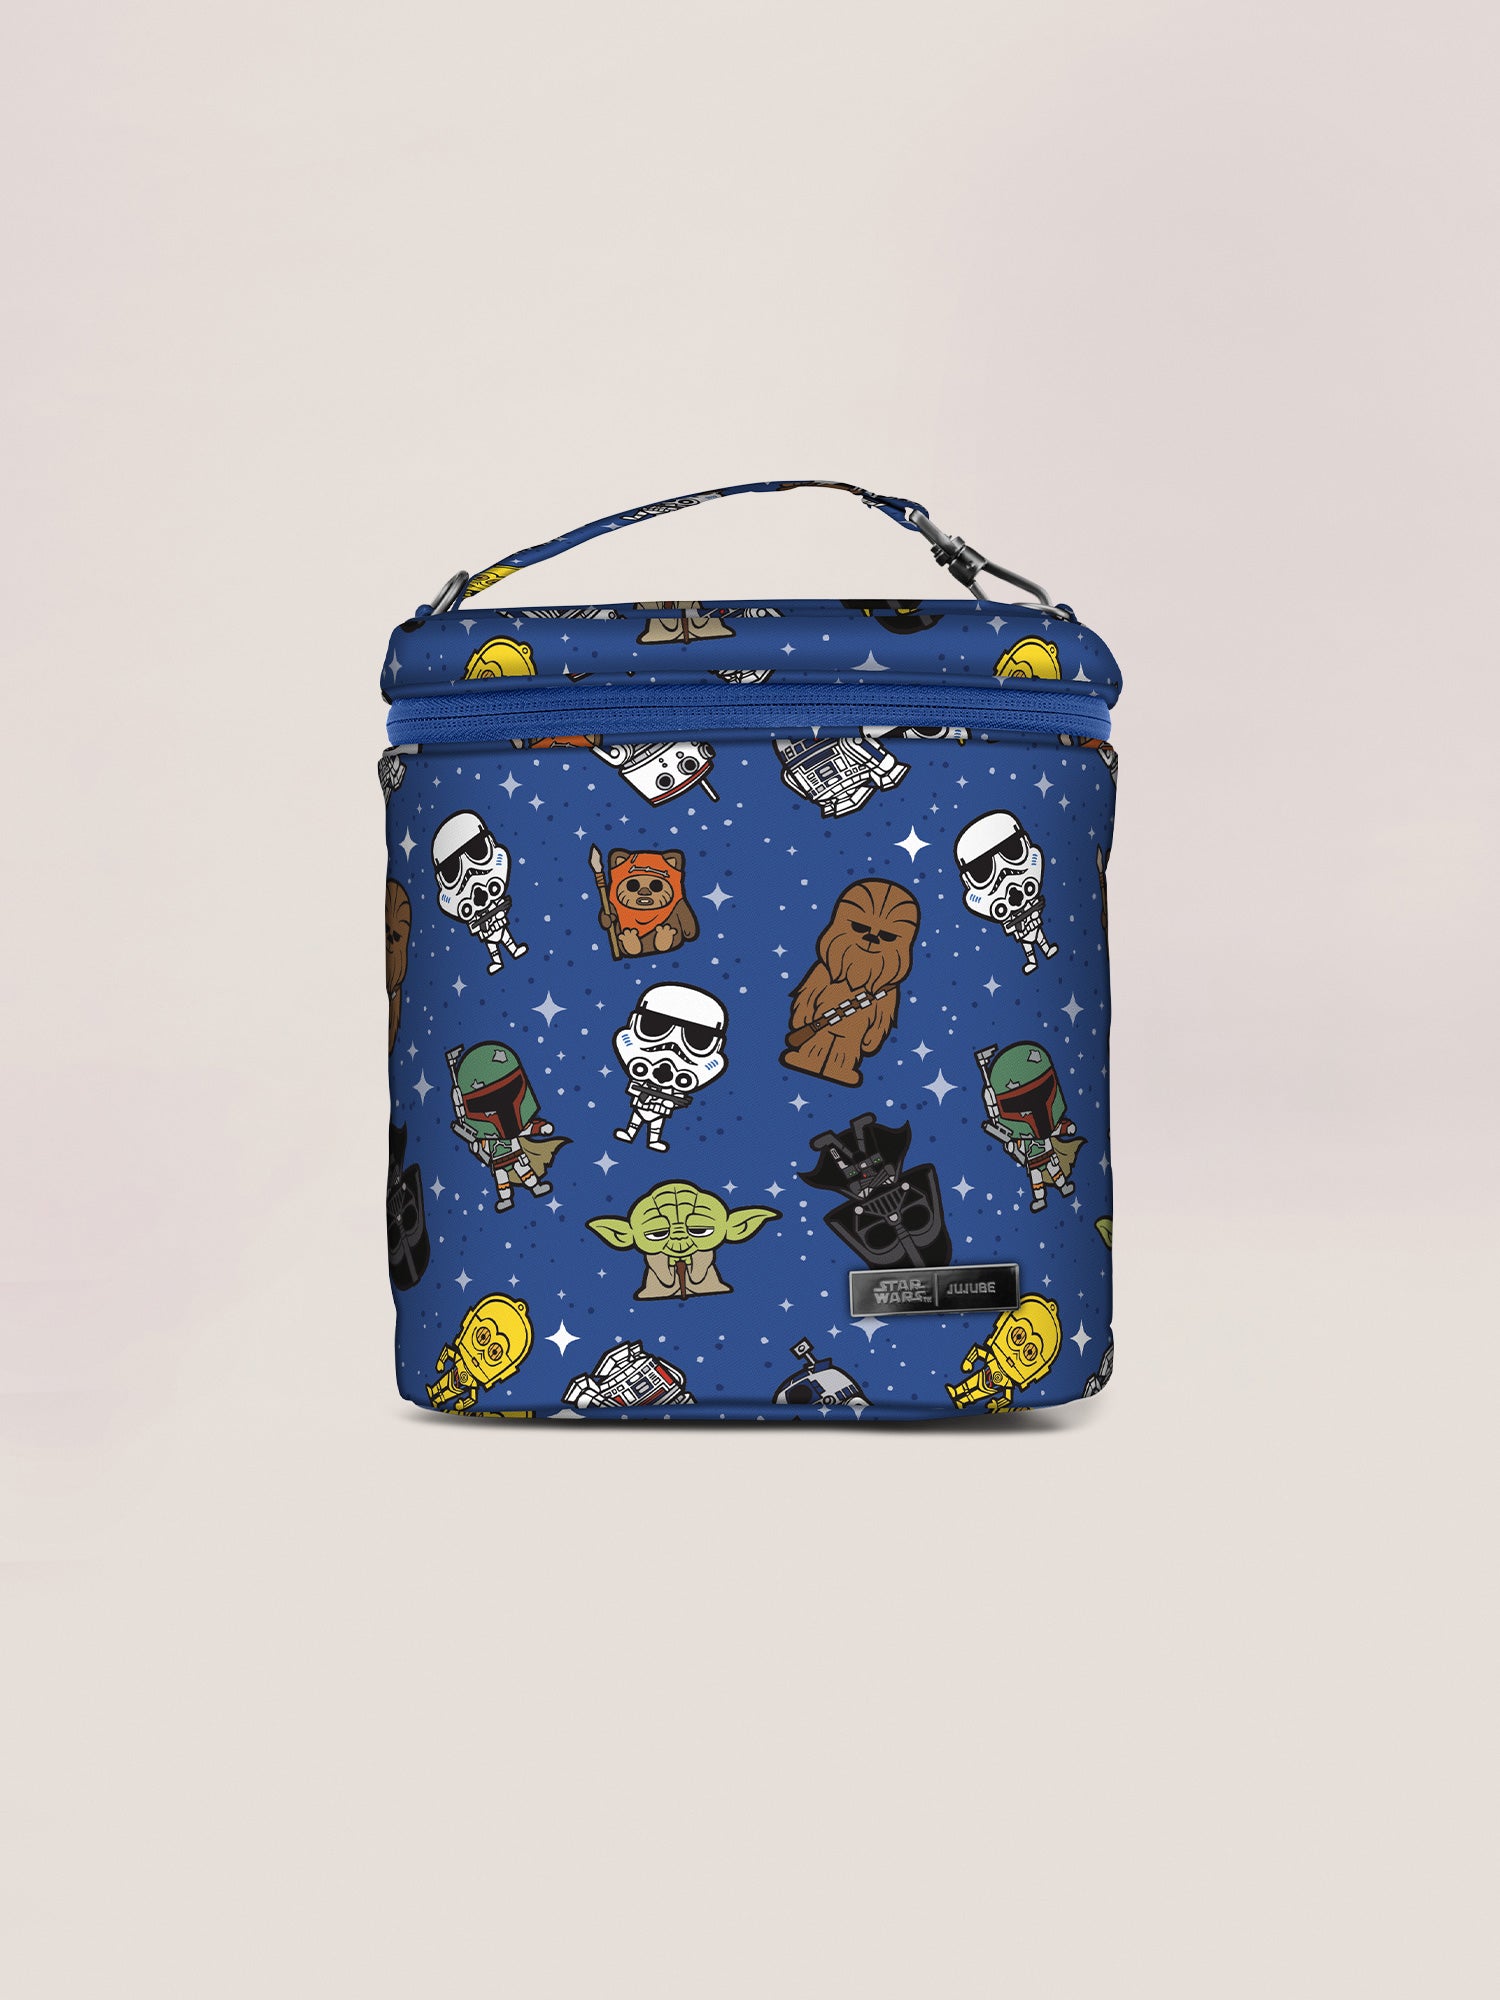 Image with a pattern of adorable STAR WARS characters traveling through a galaxy of stars